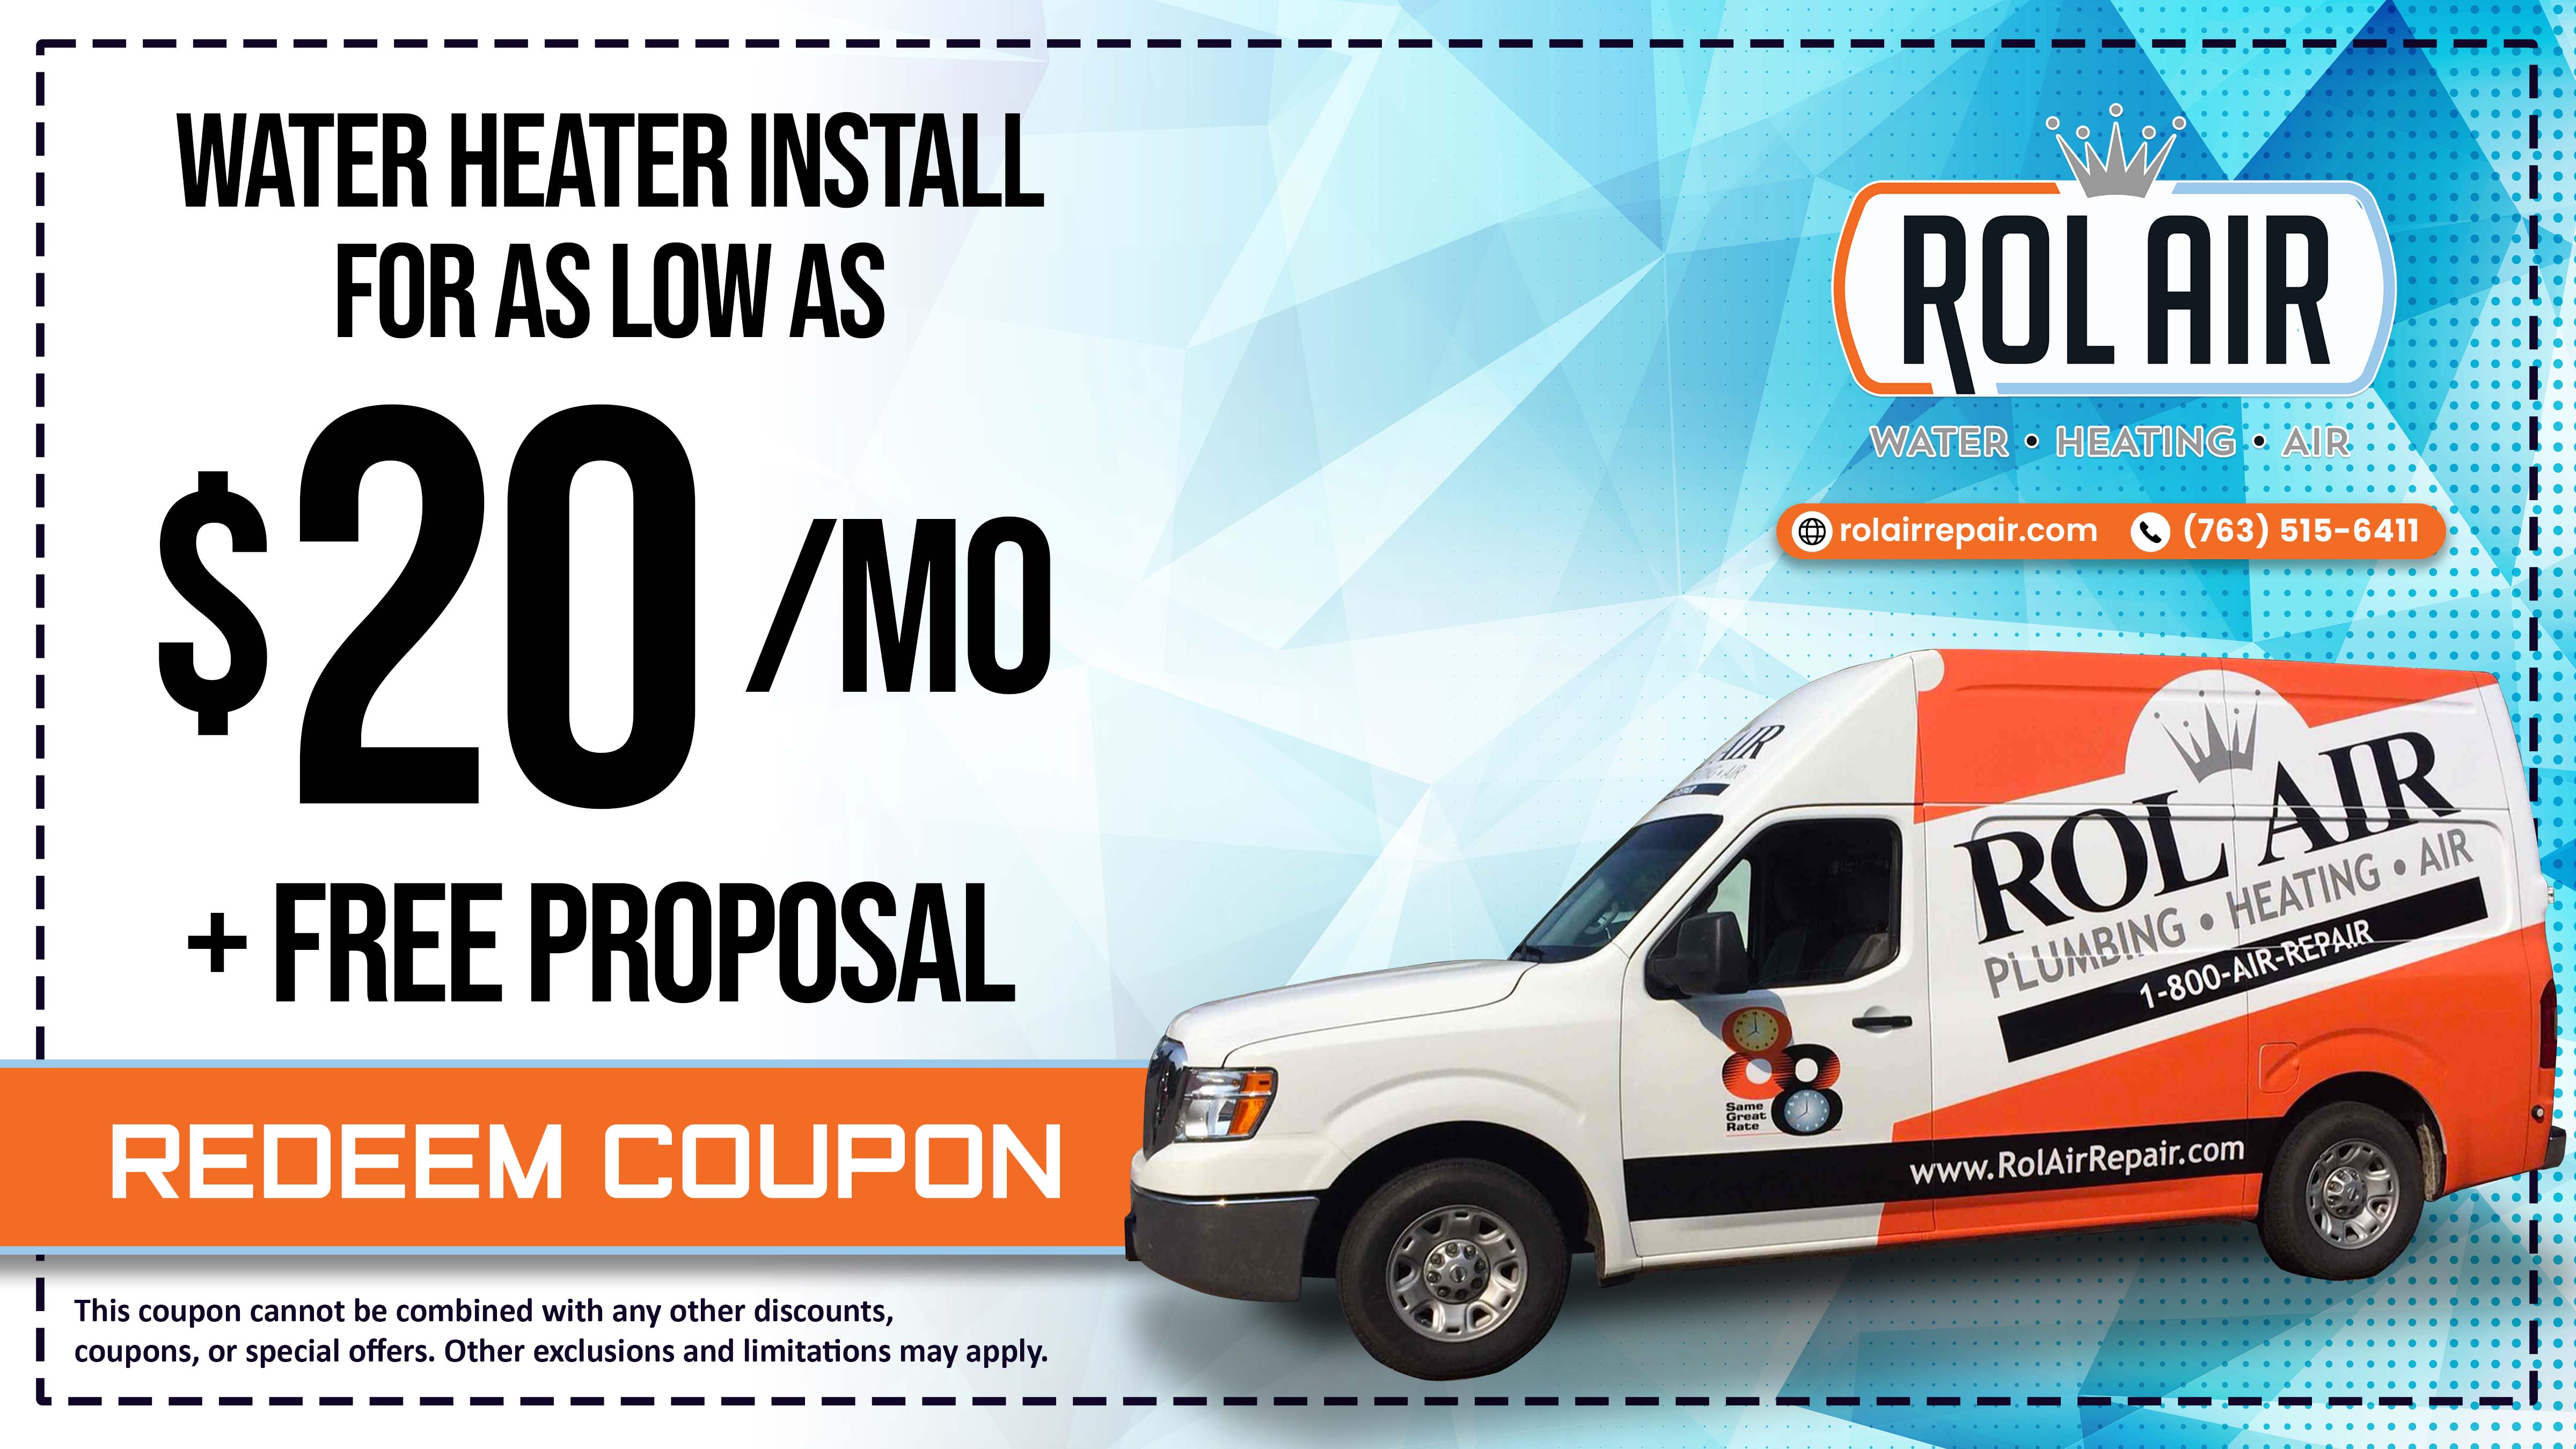 Deal for Rol Air Plumbing & Heating